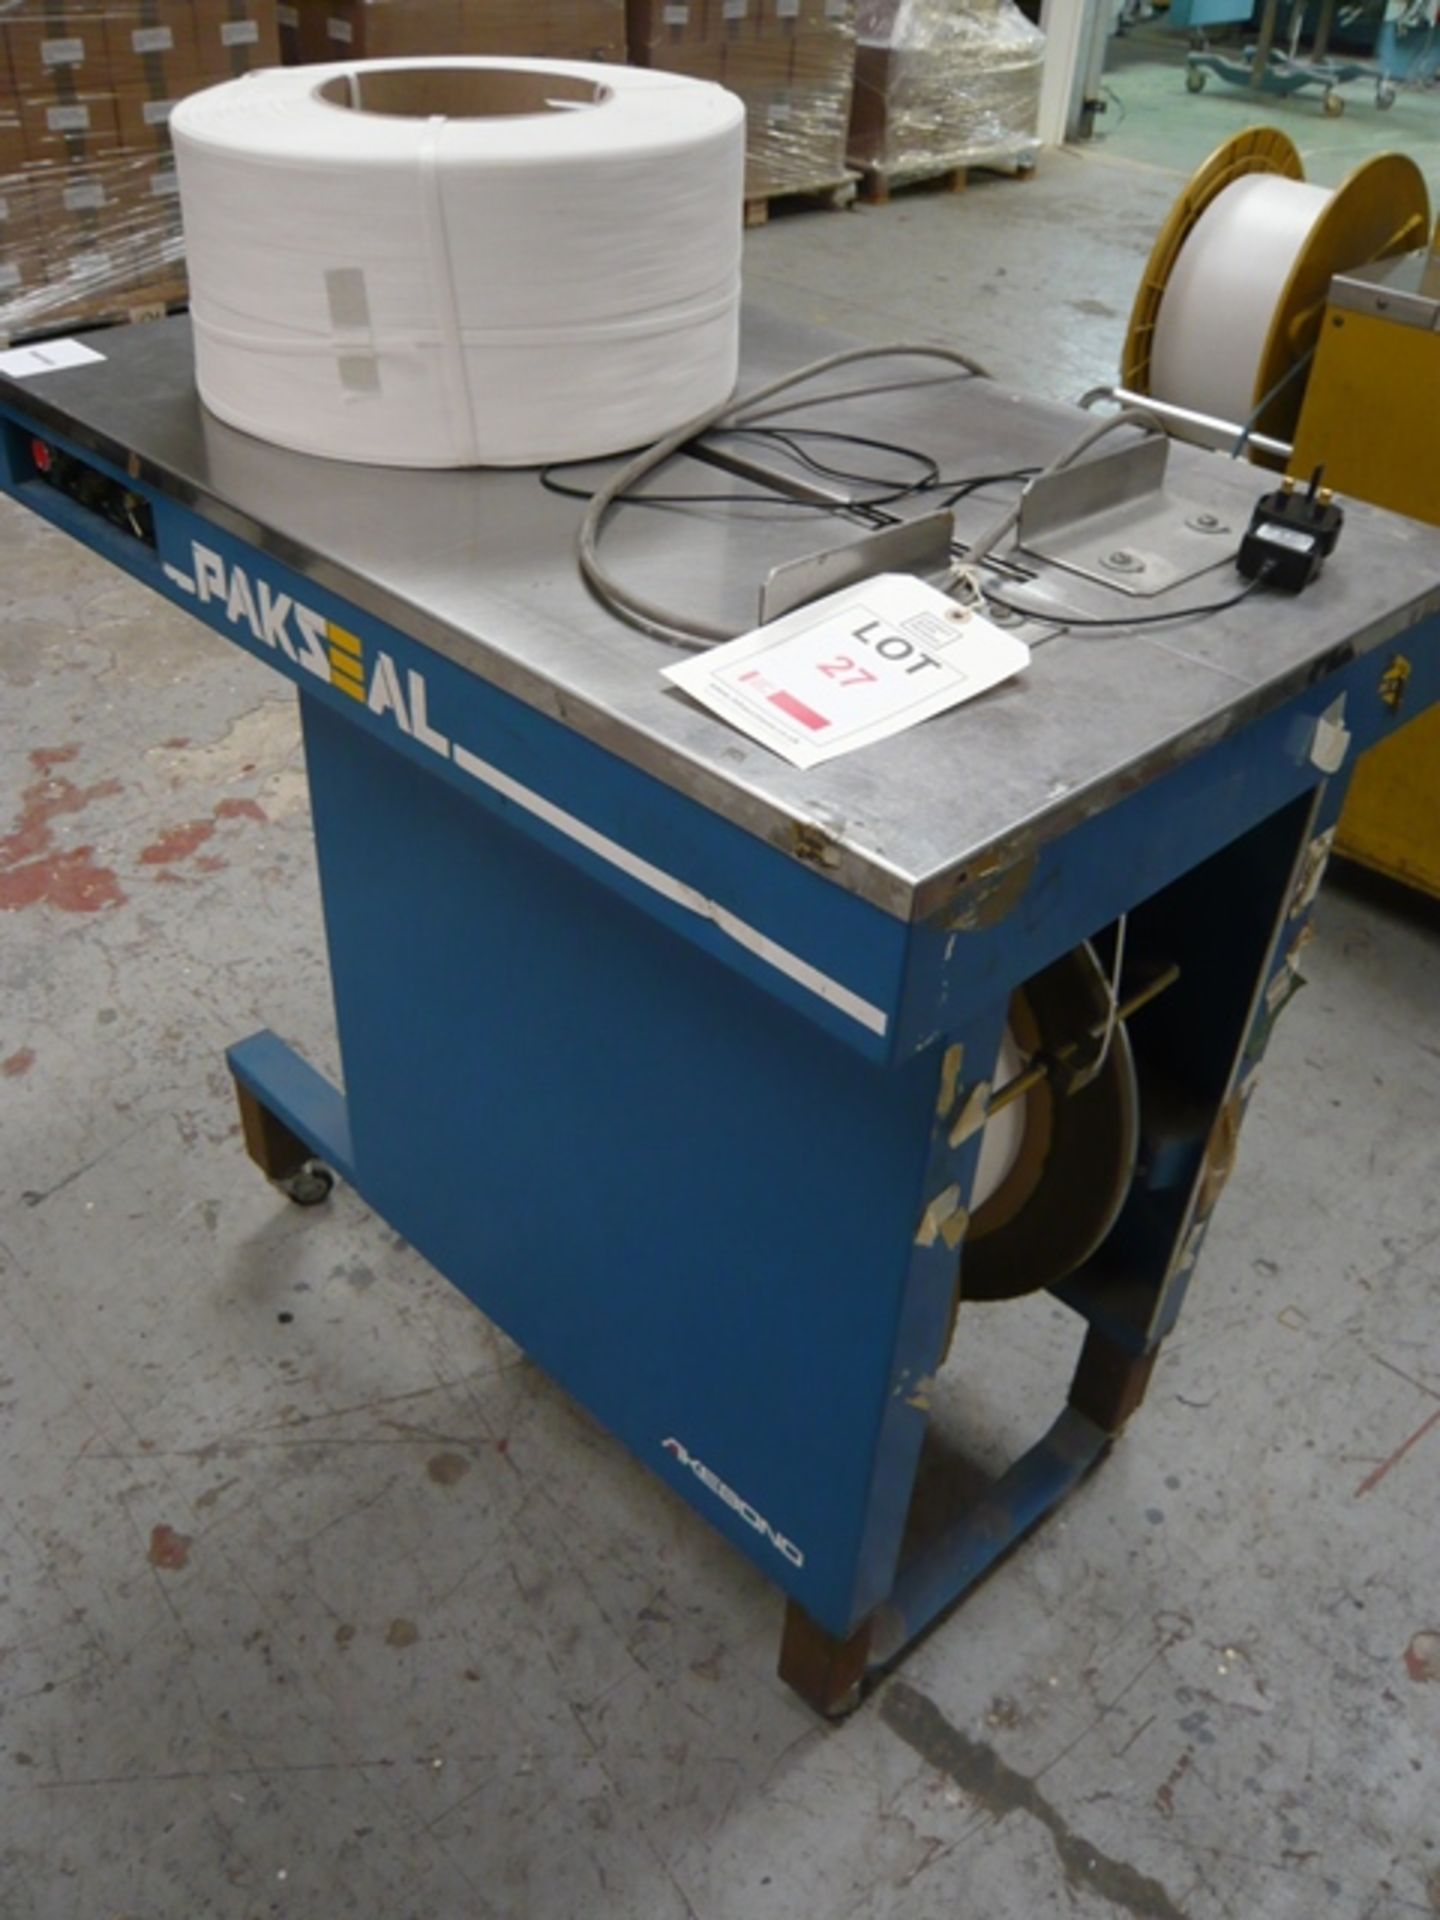 Akebond Pakseal model 555 strapping machine, serial no. 71272 - Image 2 of 3